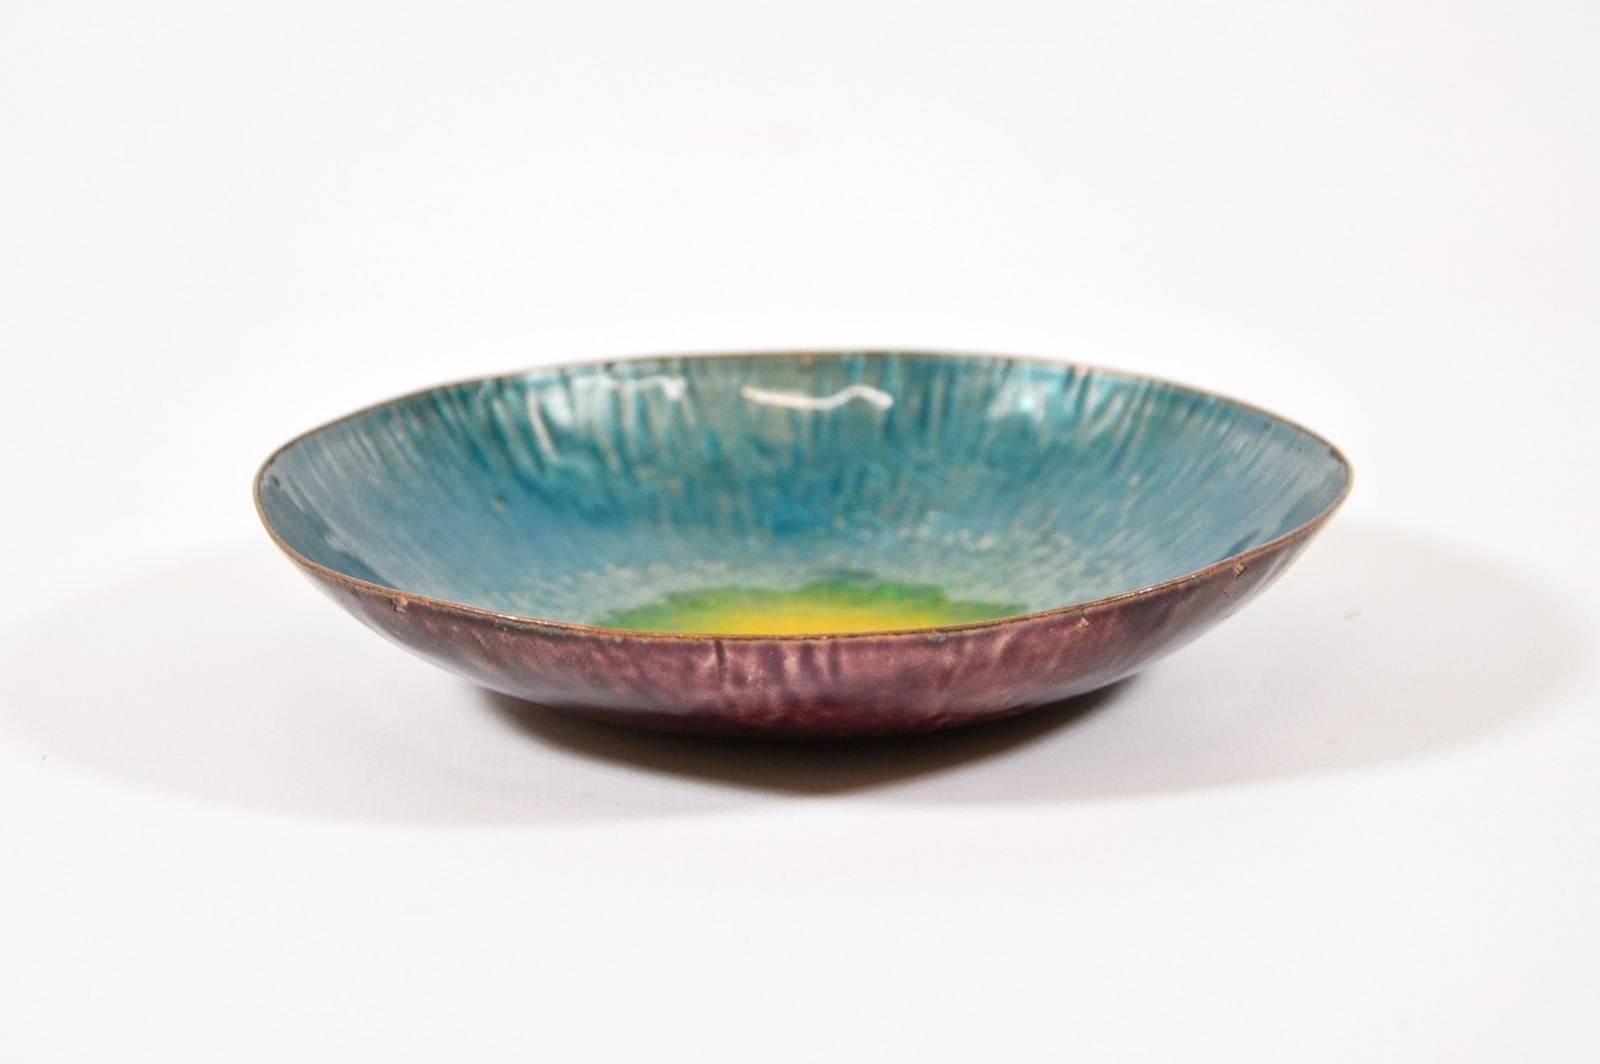 An enameled copper bowl in the style of Paolo De Poli, made in Italy, circa 1950 by Metal Arte Sulmona. The upper face is turquoise and yellow, the bottom is mauve.
Two names, 